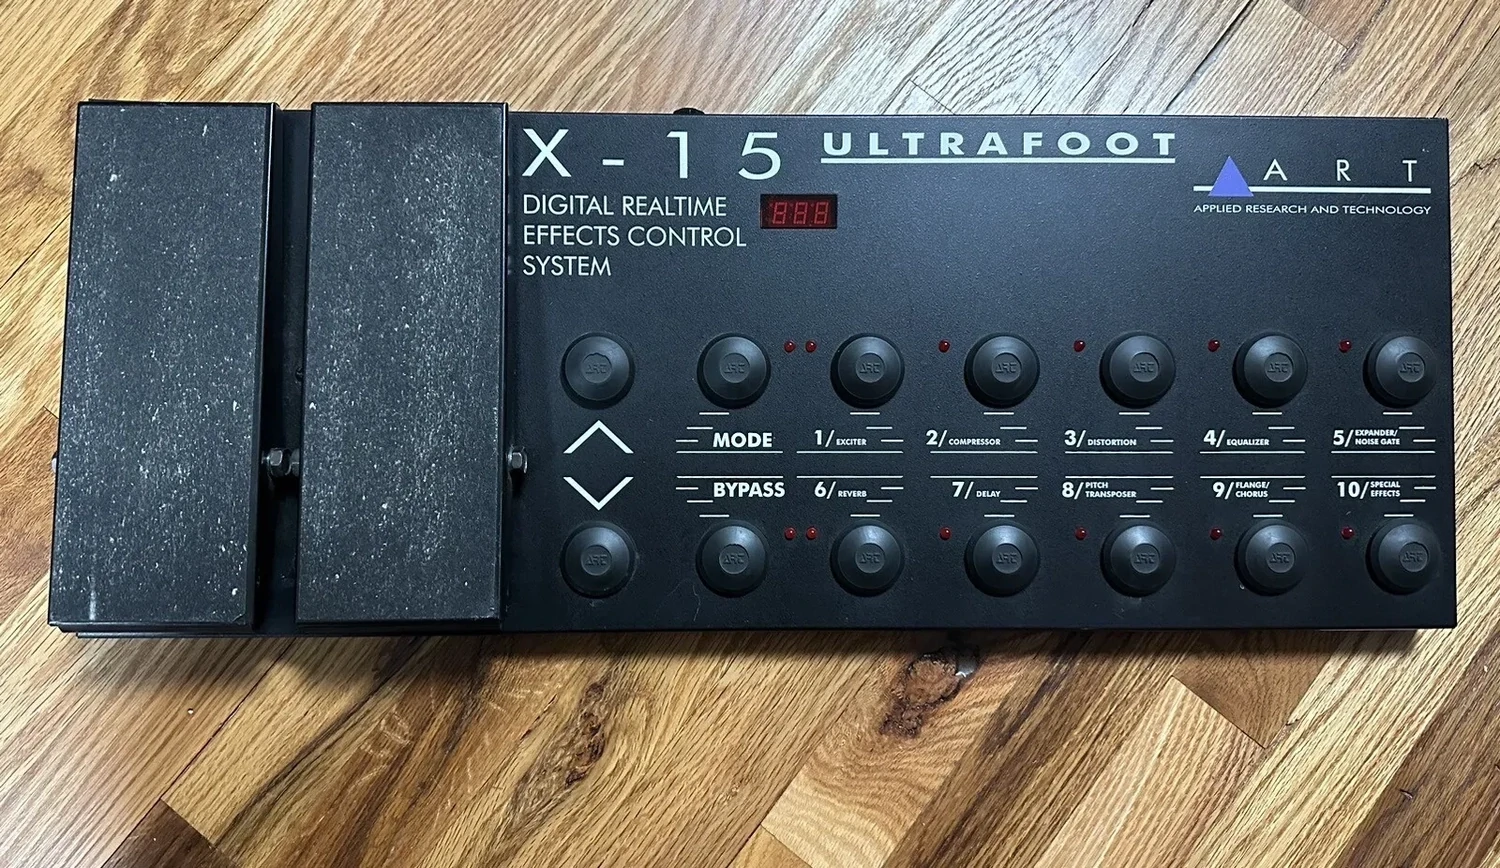 ART X-15 Ultrafoot Digital Realtime Effects Control System